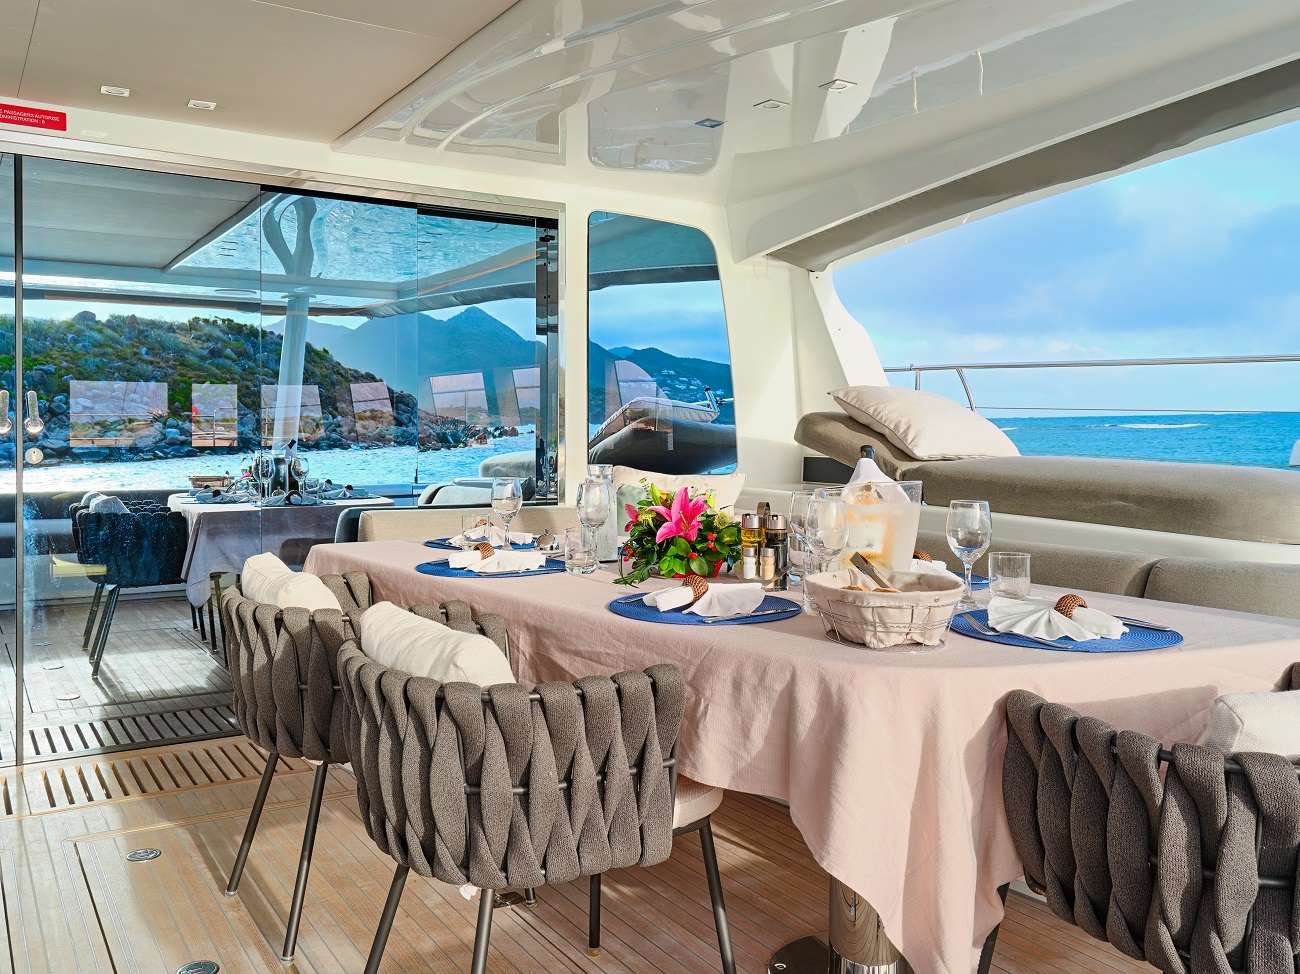 FRENCHWEST Yacht Charter - FW cokpit table - N. Claris pic